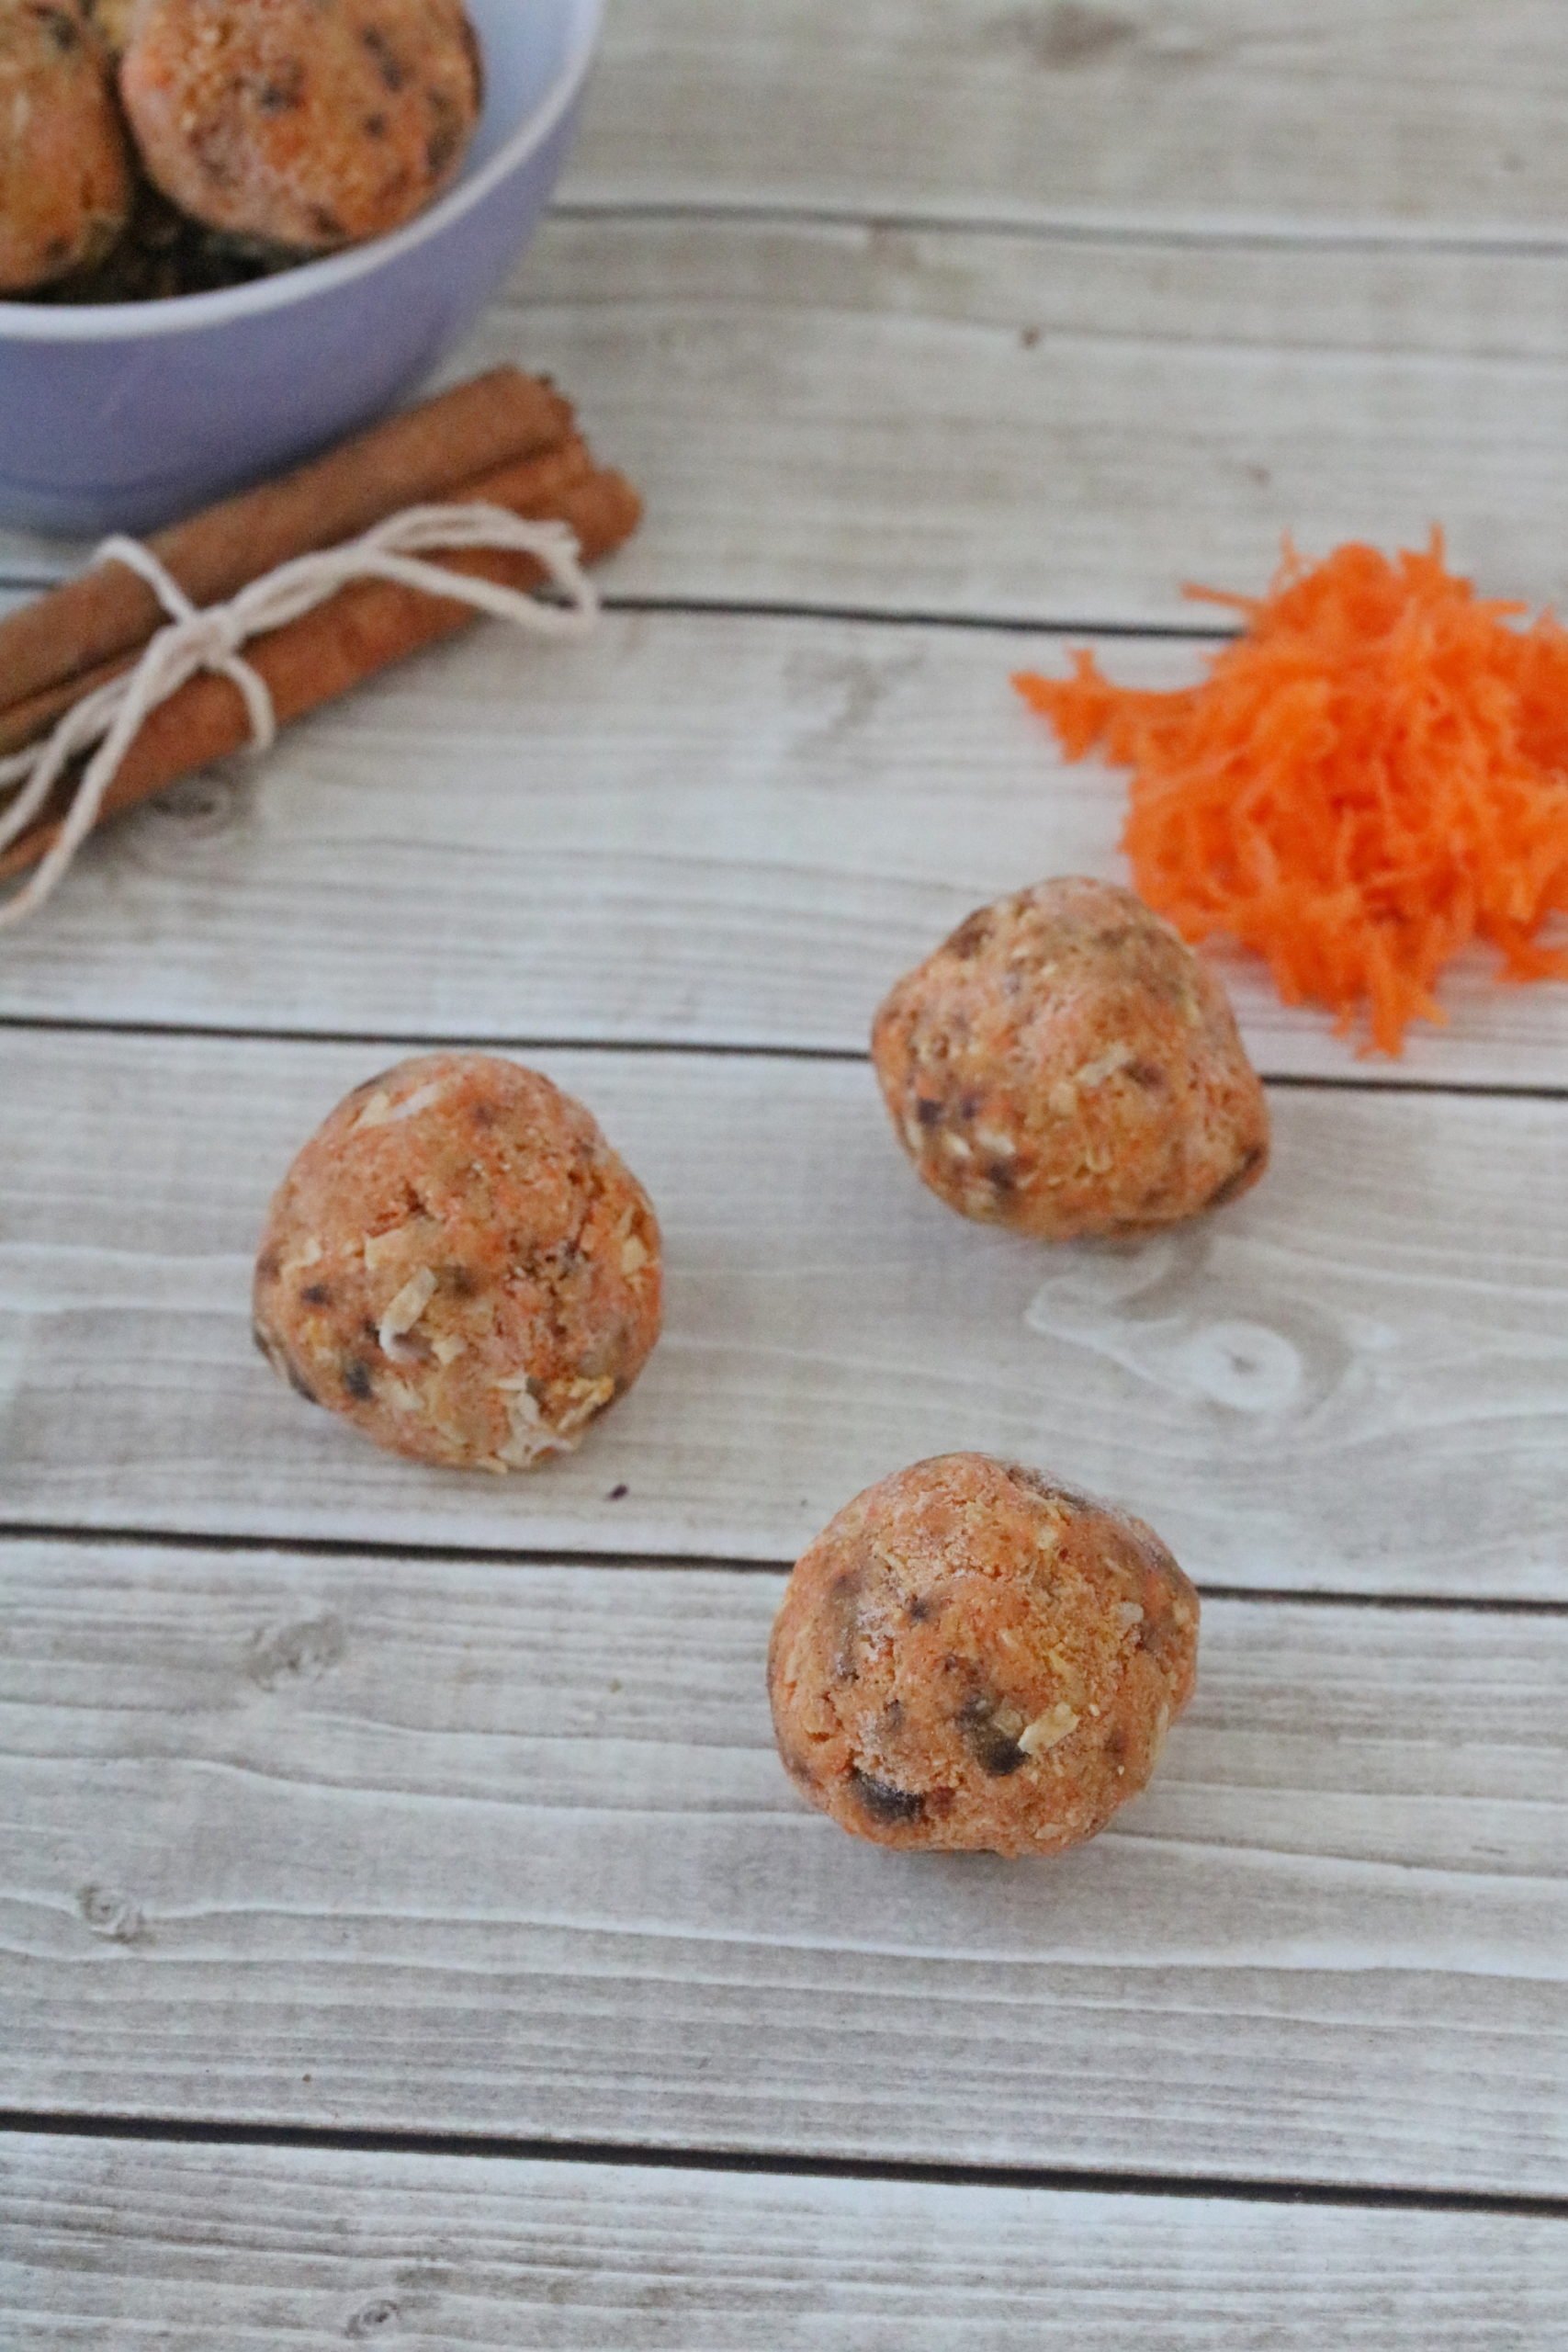 Carrot cake energy balls with shredded carrot and cinnamon behind them